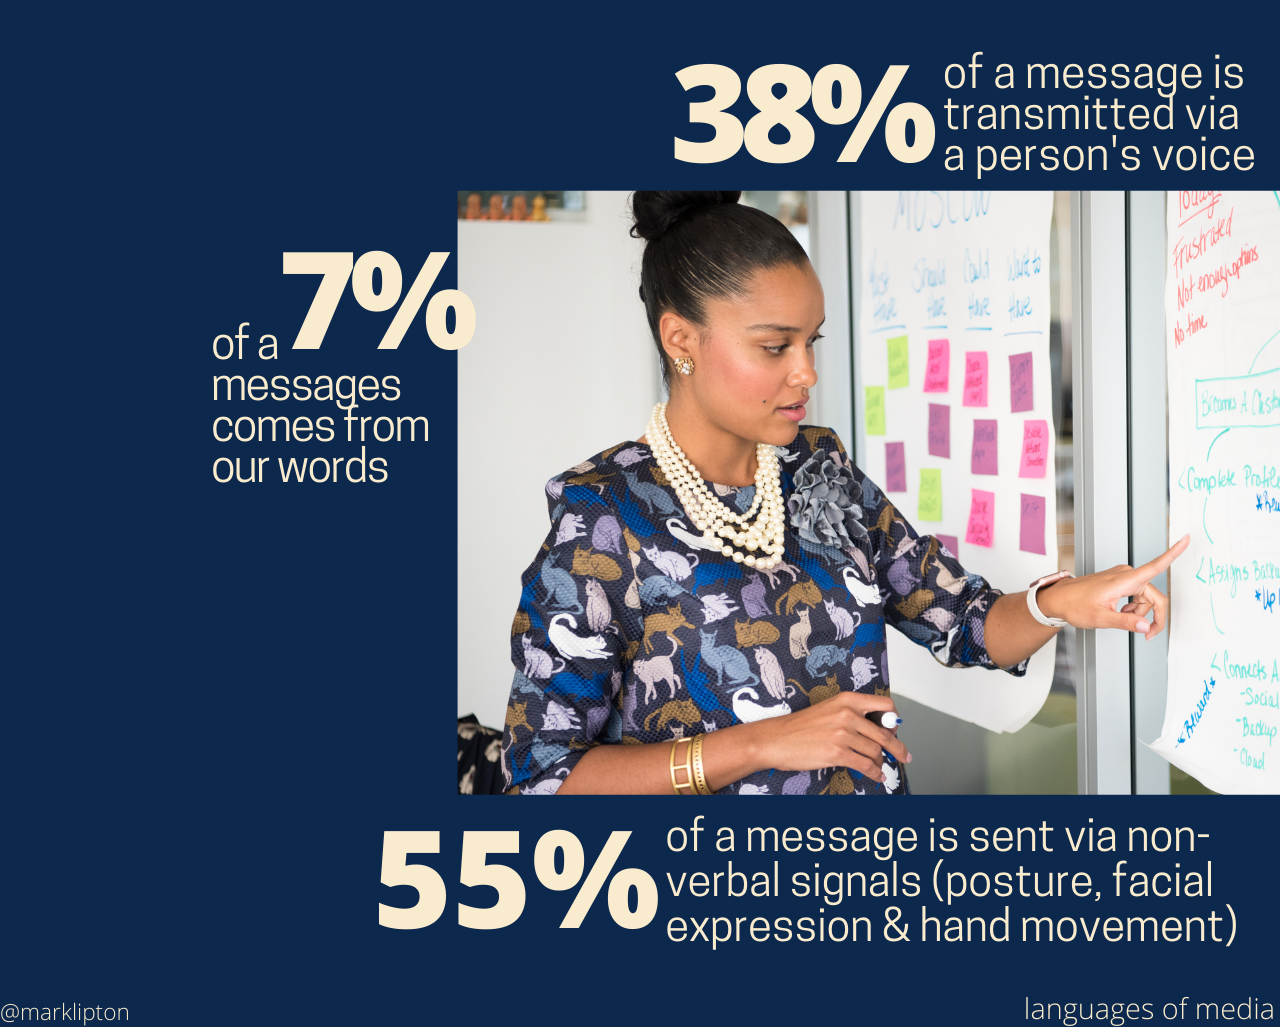 38% of a message is transmitted via a person's voice; 7% of a message comes from our words; 55% of a message is sent via non-verbal signals (posture, facial expression & hand movement. Anthropologist, Edward T. Hall gives greater emphasis to the part played by culture in nonverbal communication. Similarly, British authority on the social psychological approaches to the study of nonverbal communication, Michael Argyle's account focuses on the social & cultural contexts.